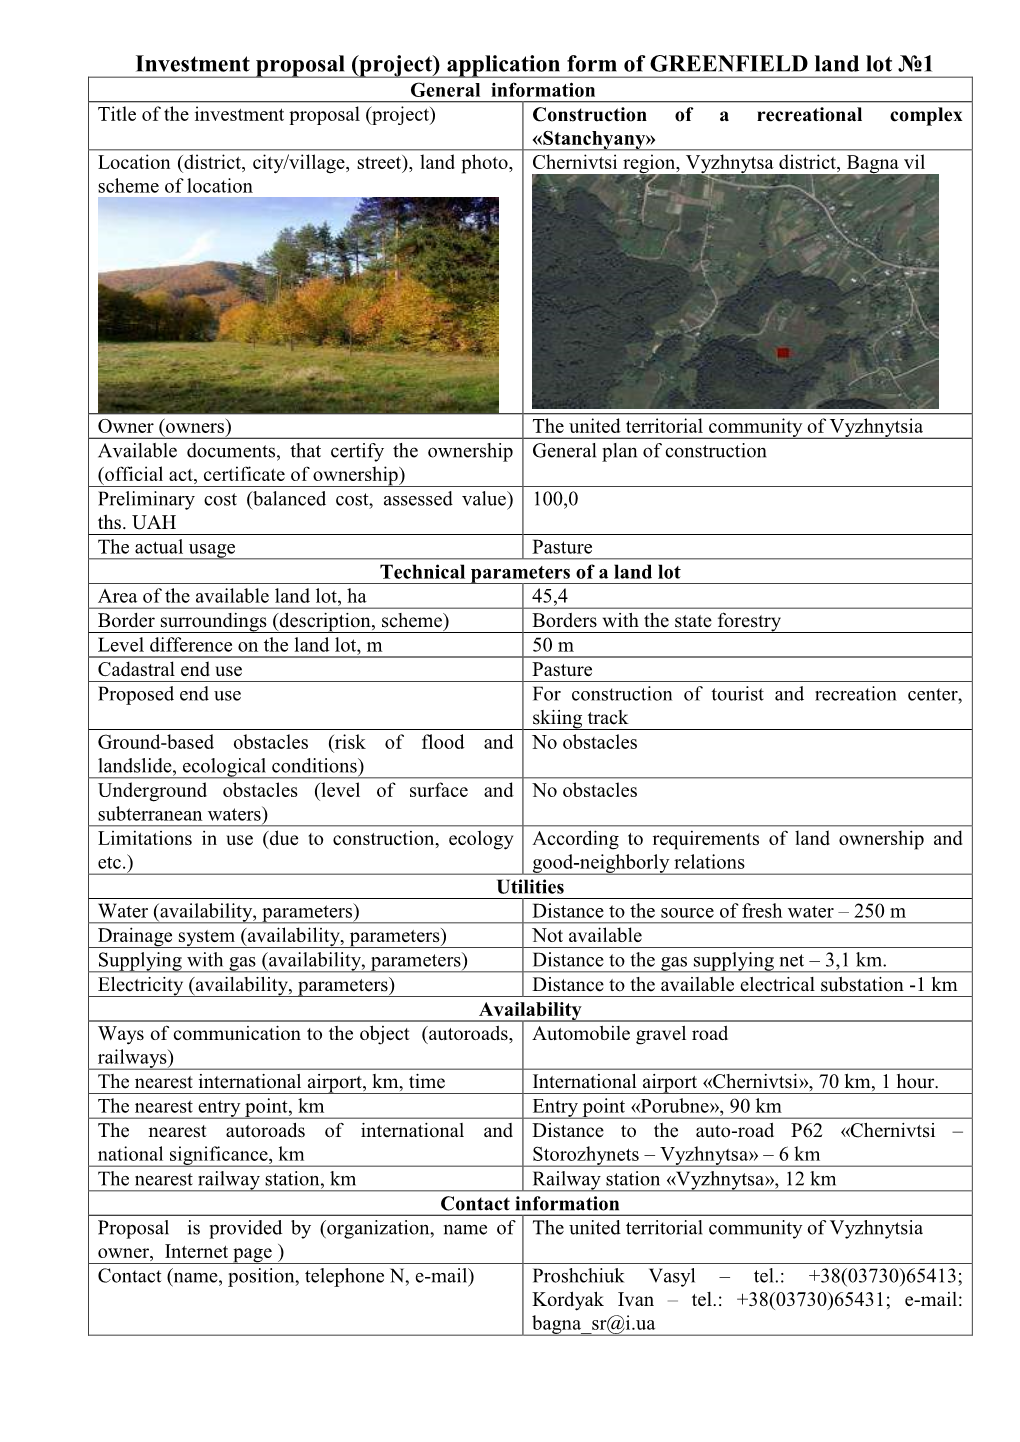 (Project) Application Form of GREENFIЕLD Land Lot №1